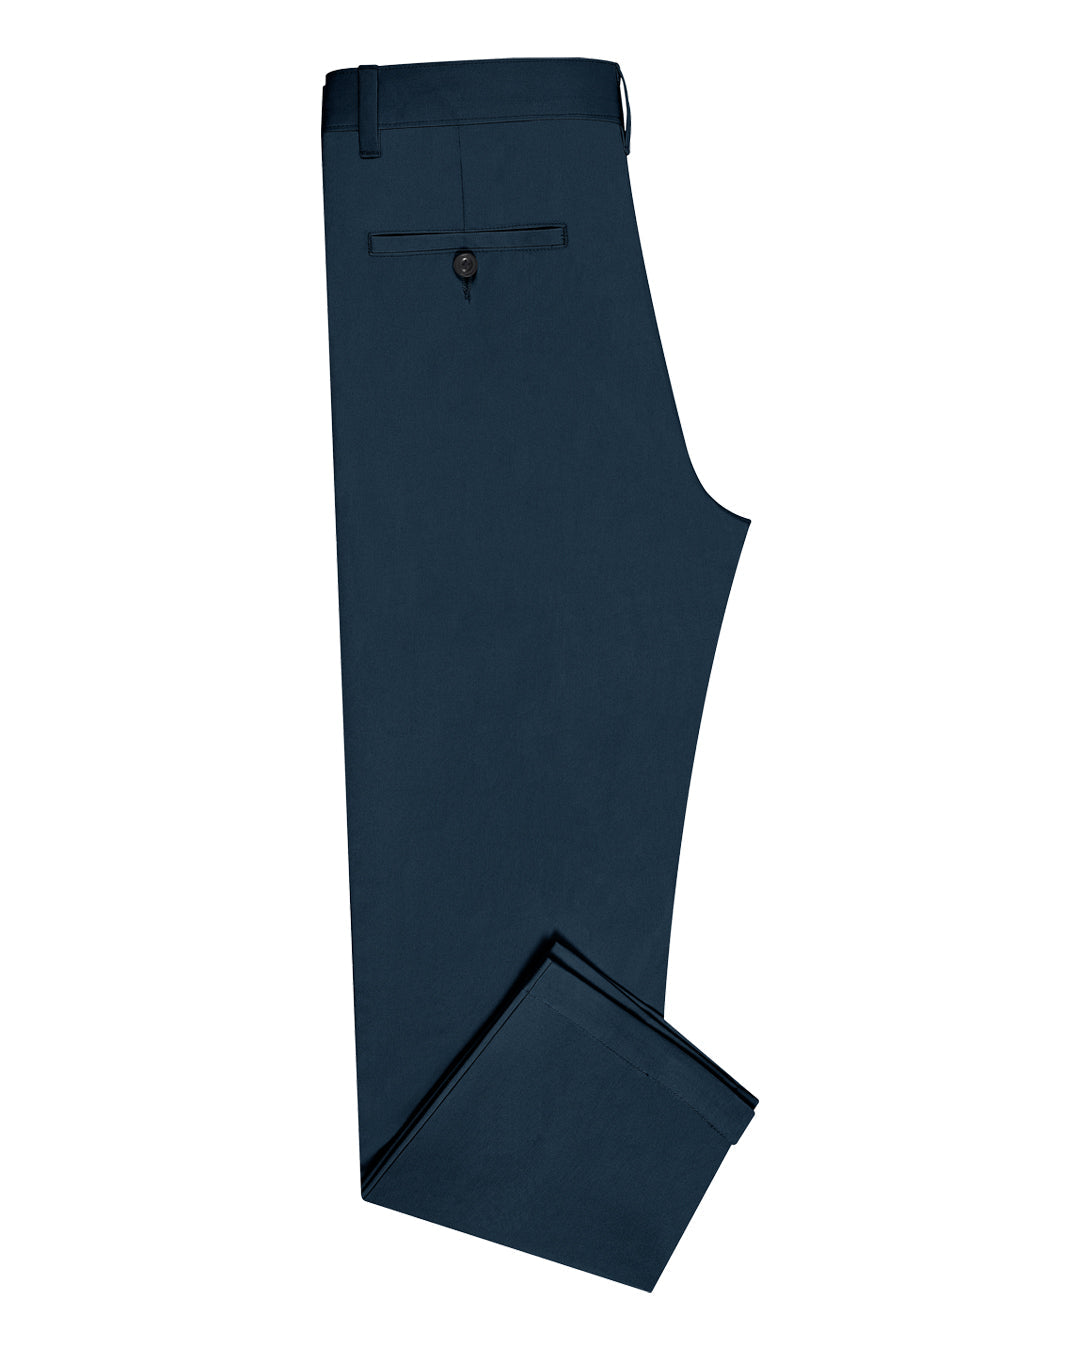 Side view of custom Genoa Chino pants for men by Luxire in ink blue